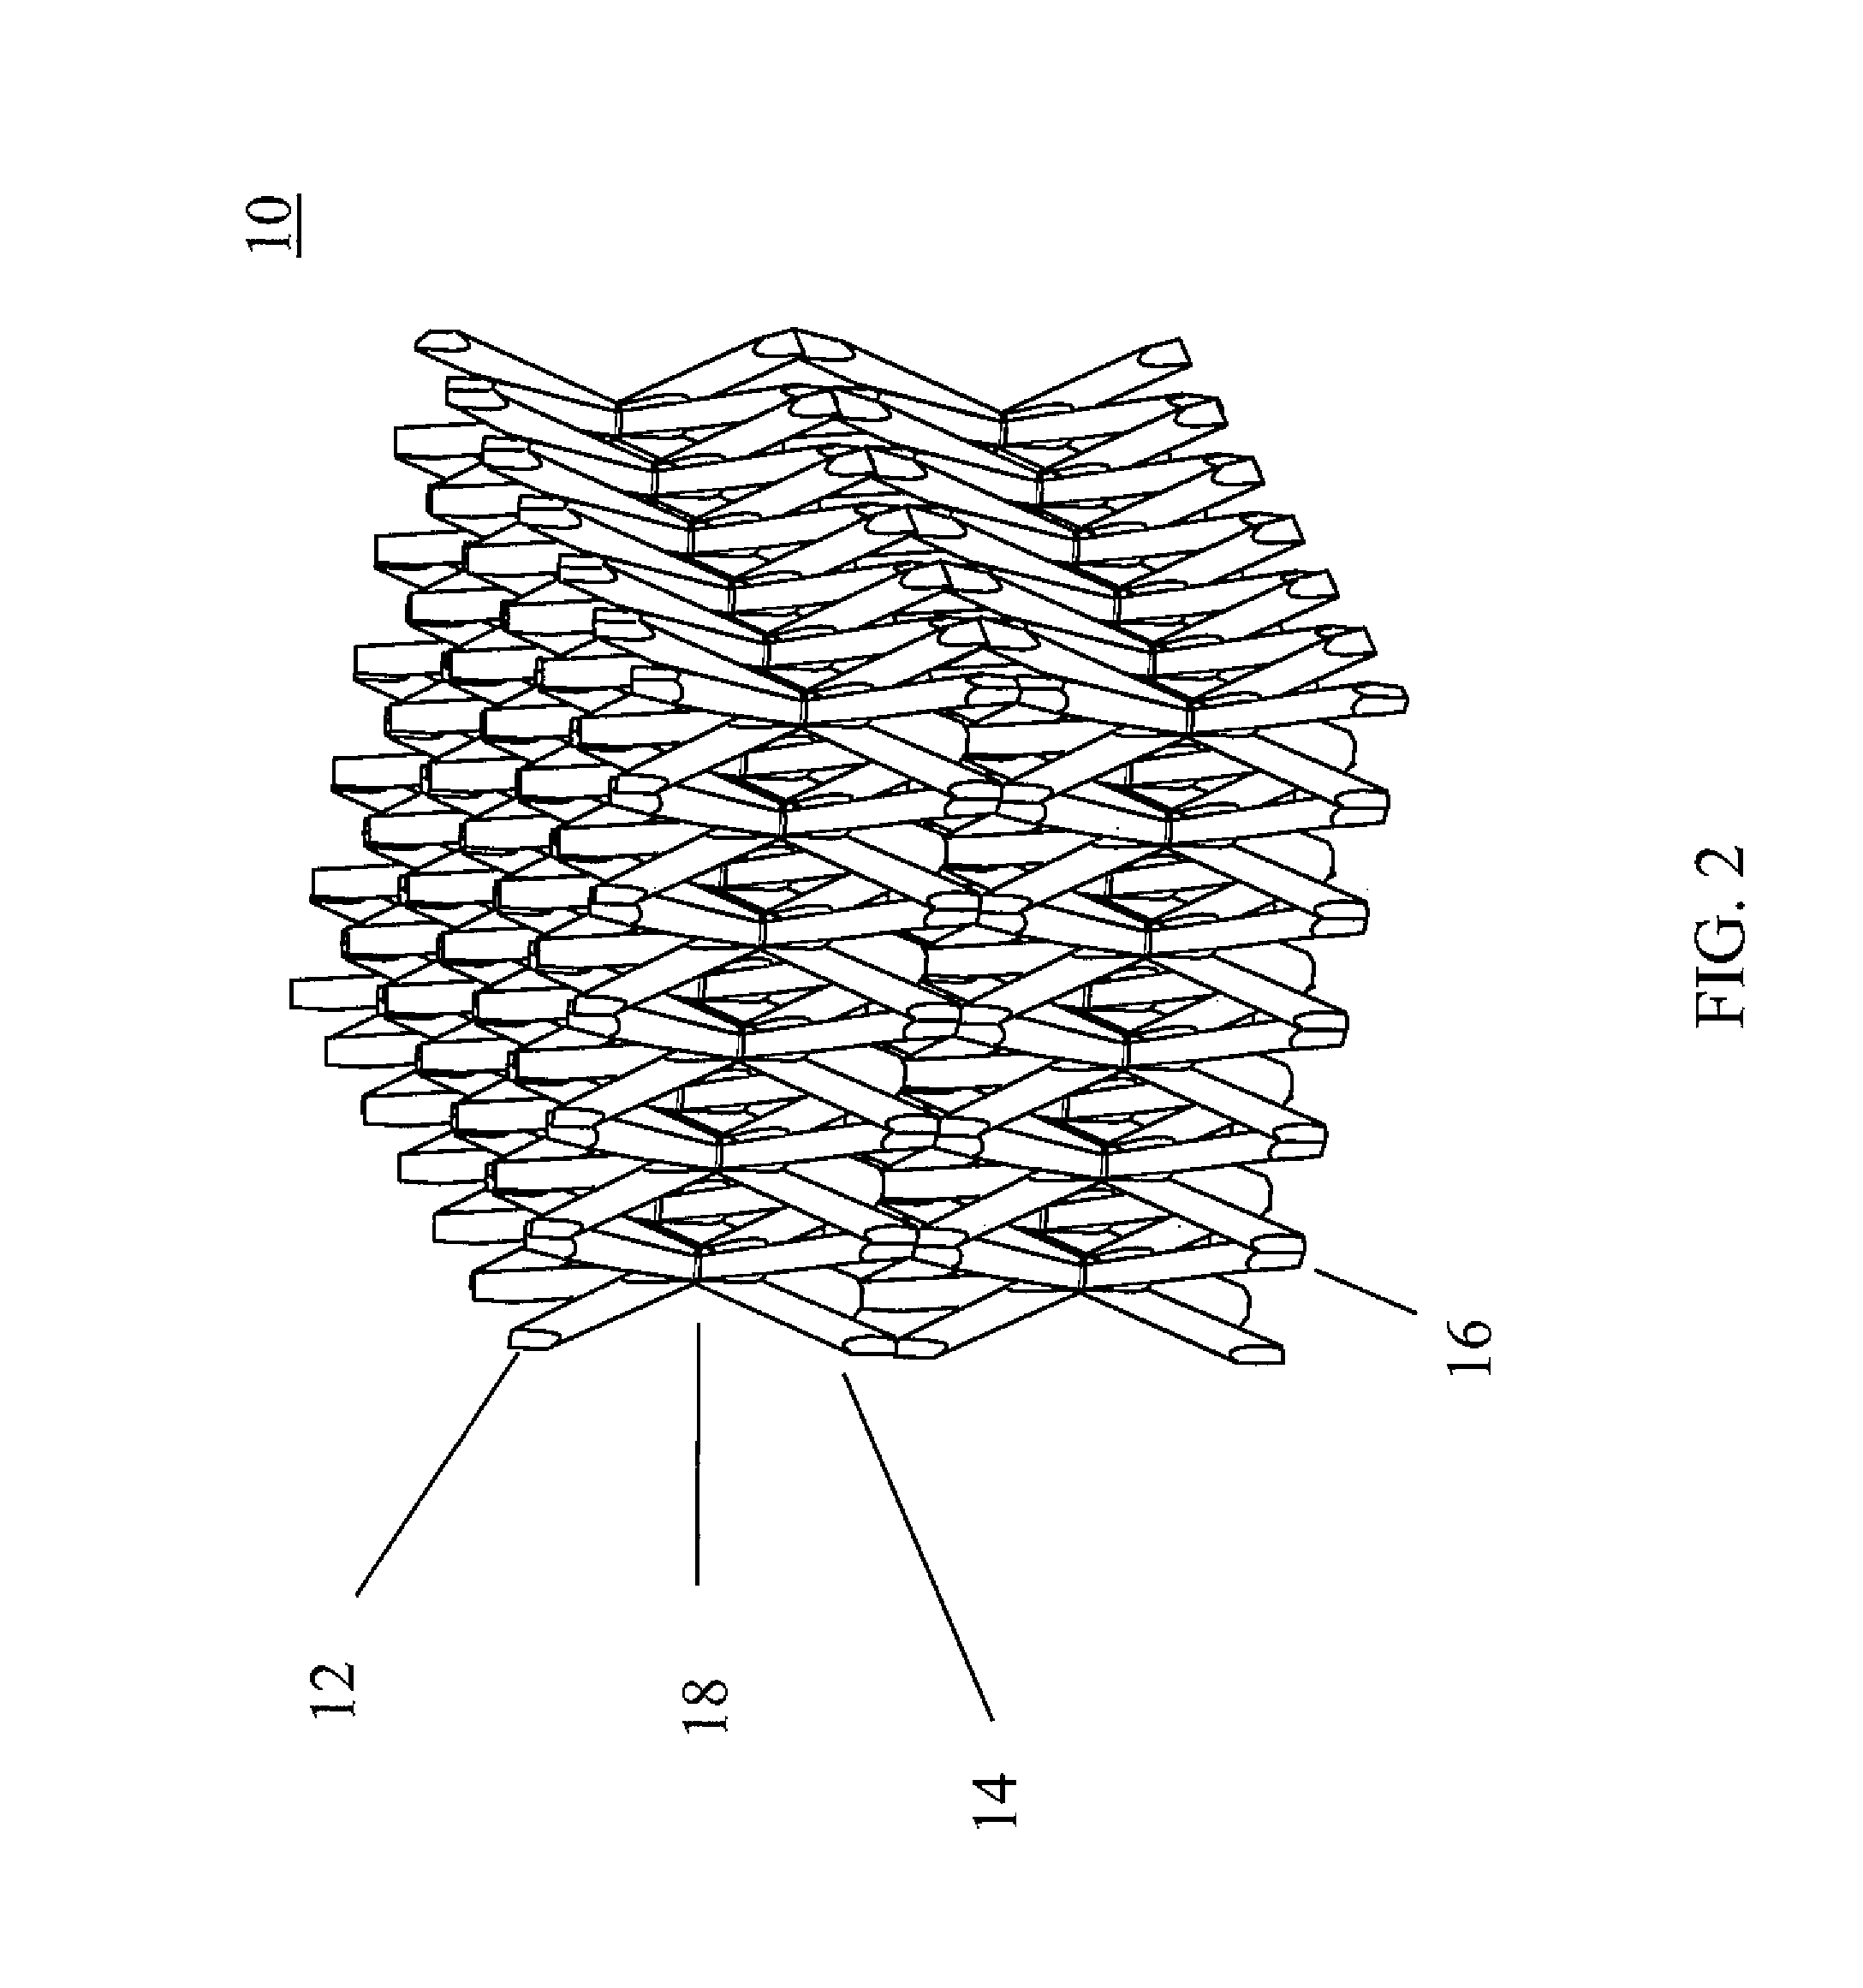 Micro-truss based composite friction-and-wear apparatus and methods of manufacturing the same